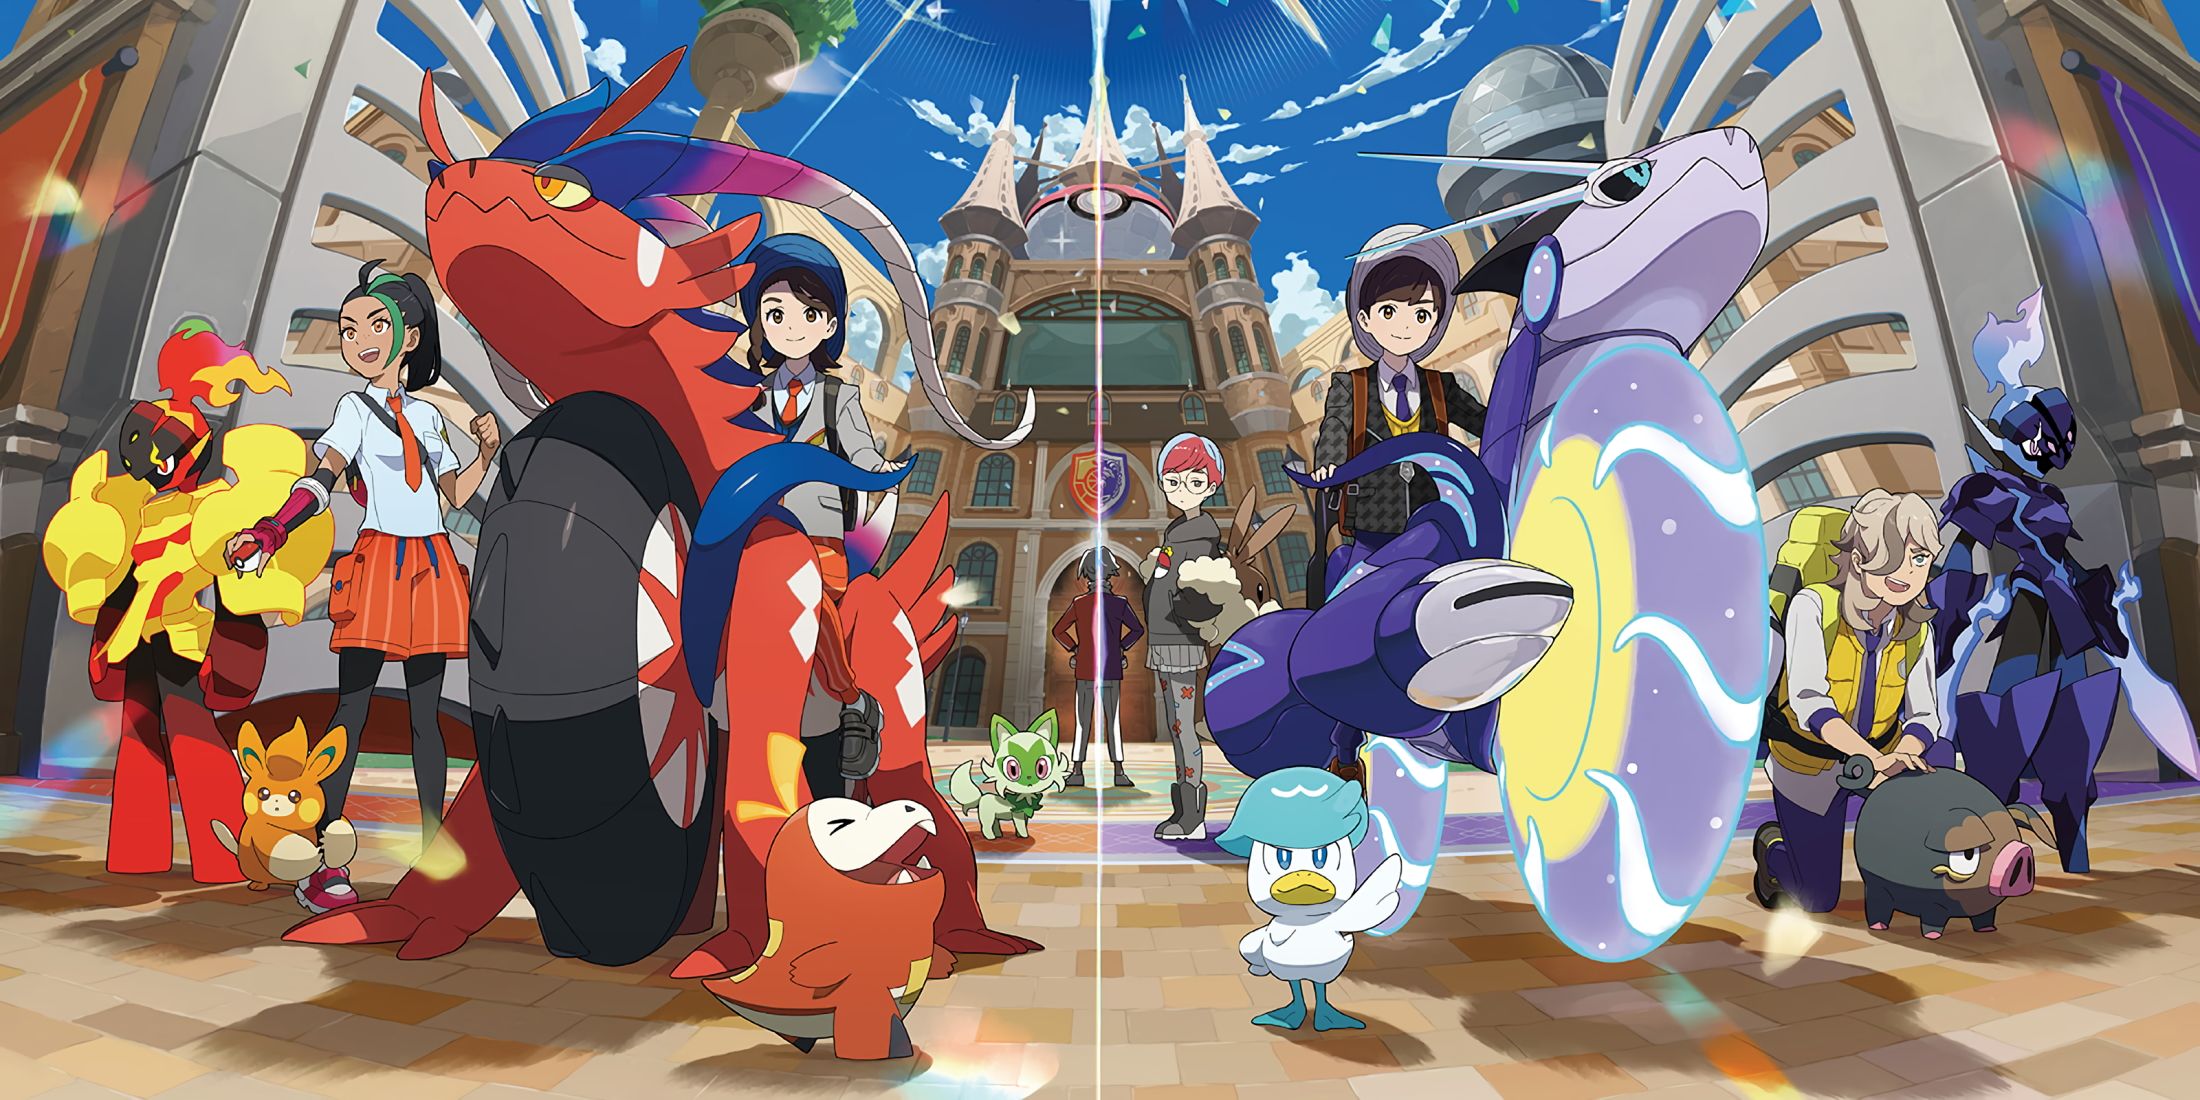 A key promotional visual for Pokemon Scarlet and Violet